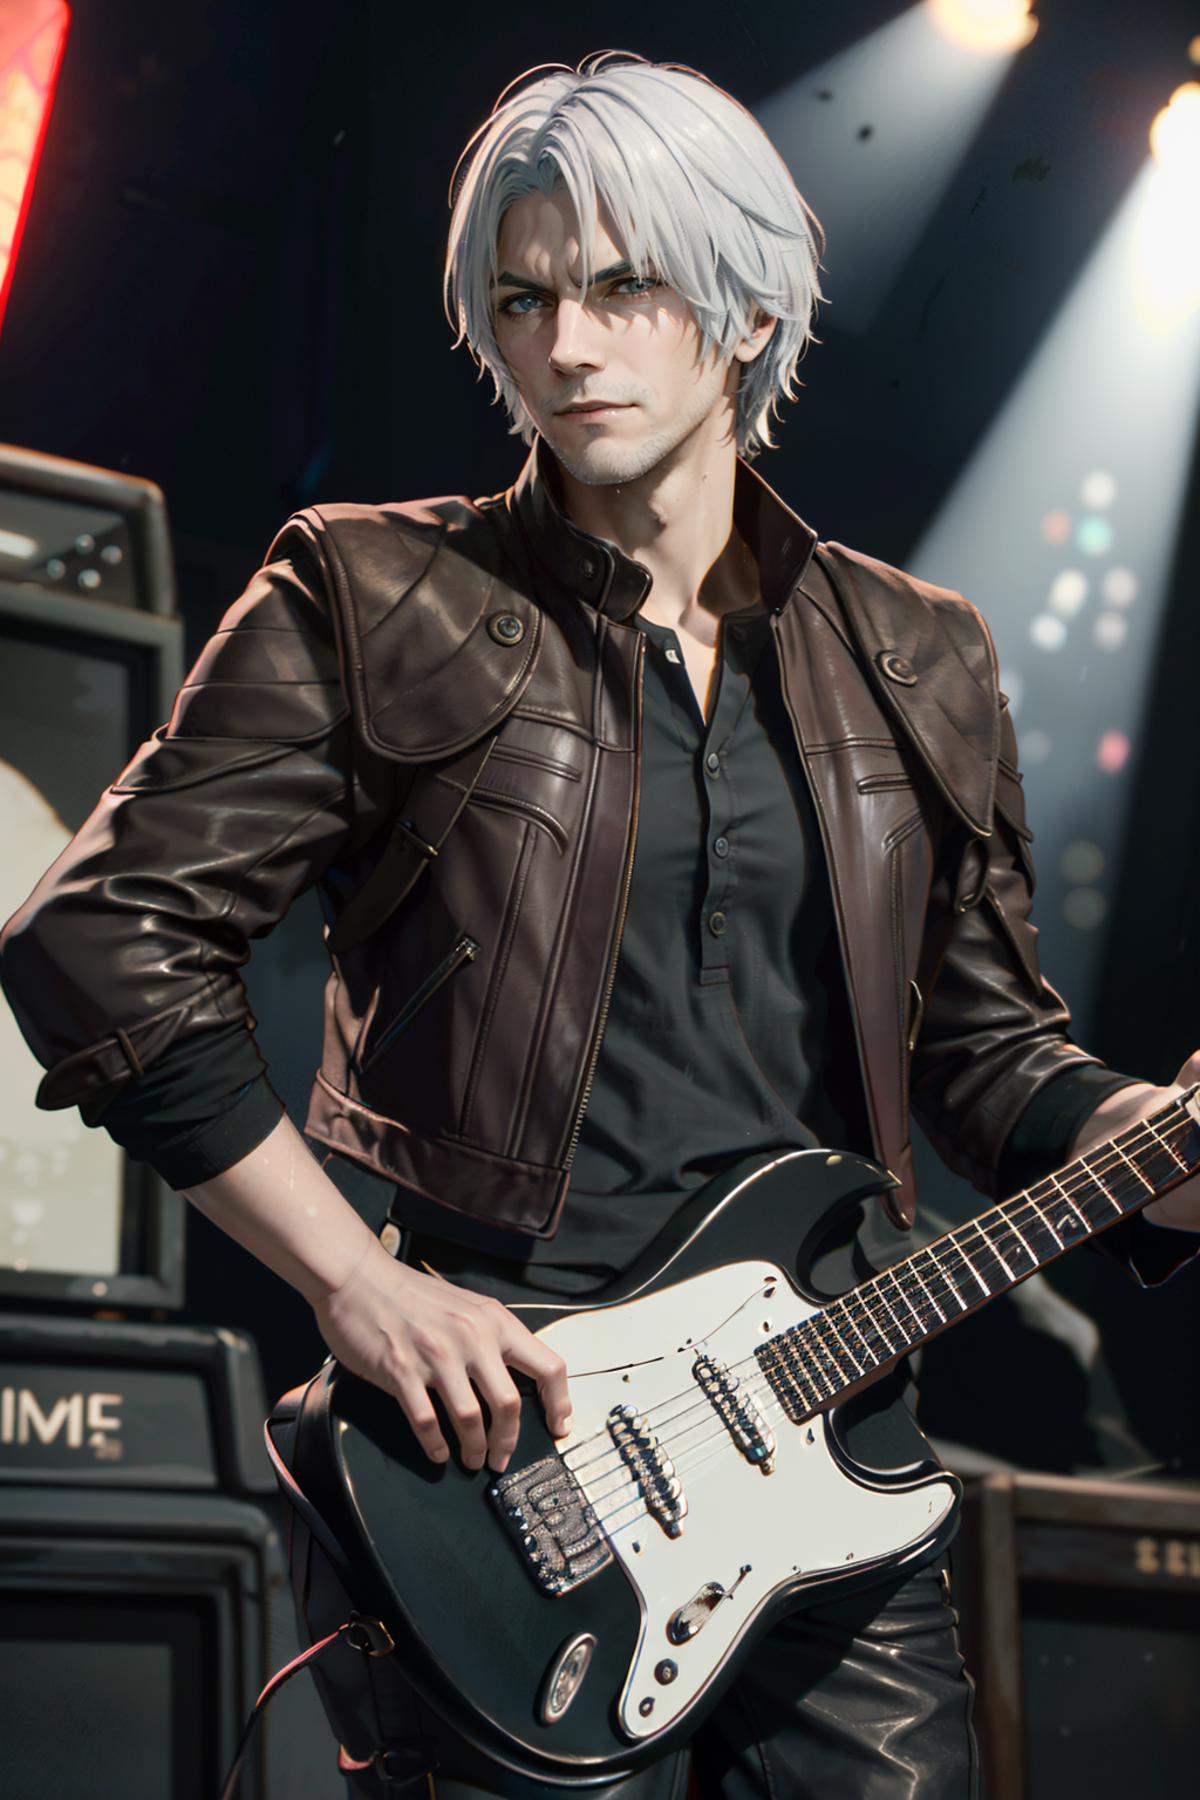 Dante from Devil May Cry 5 image by BloodRedKittie